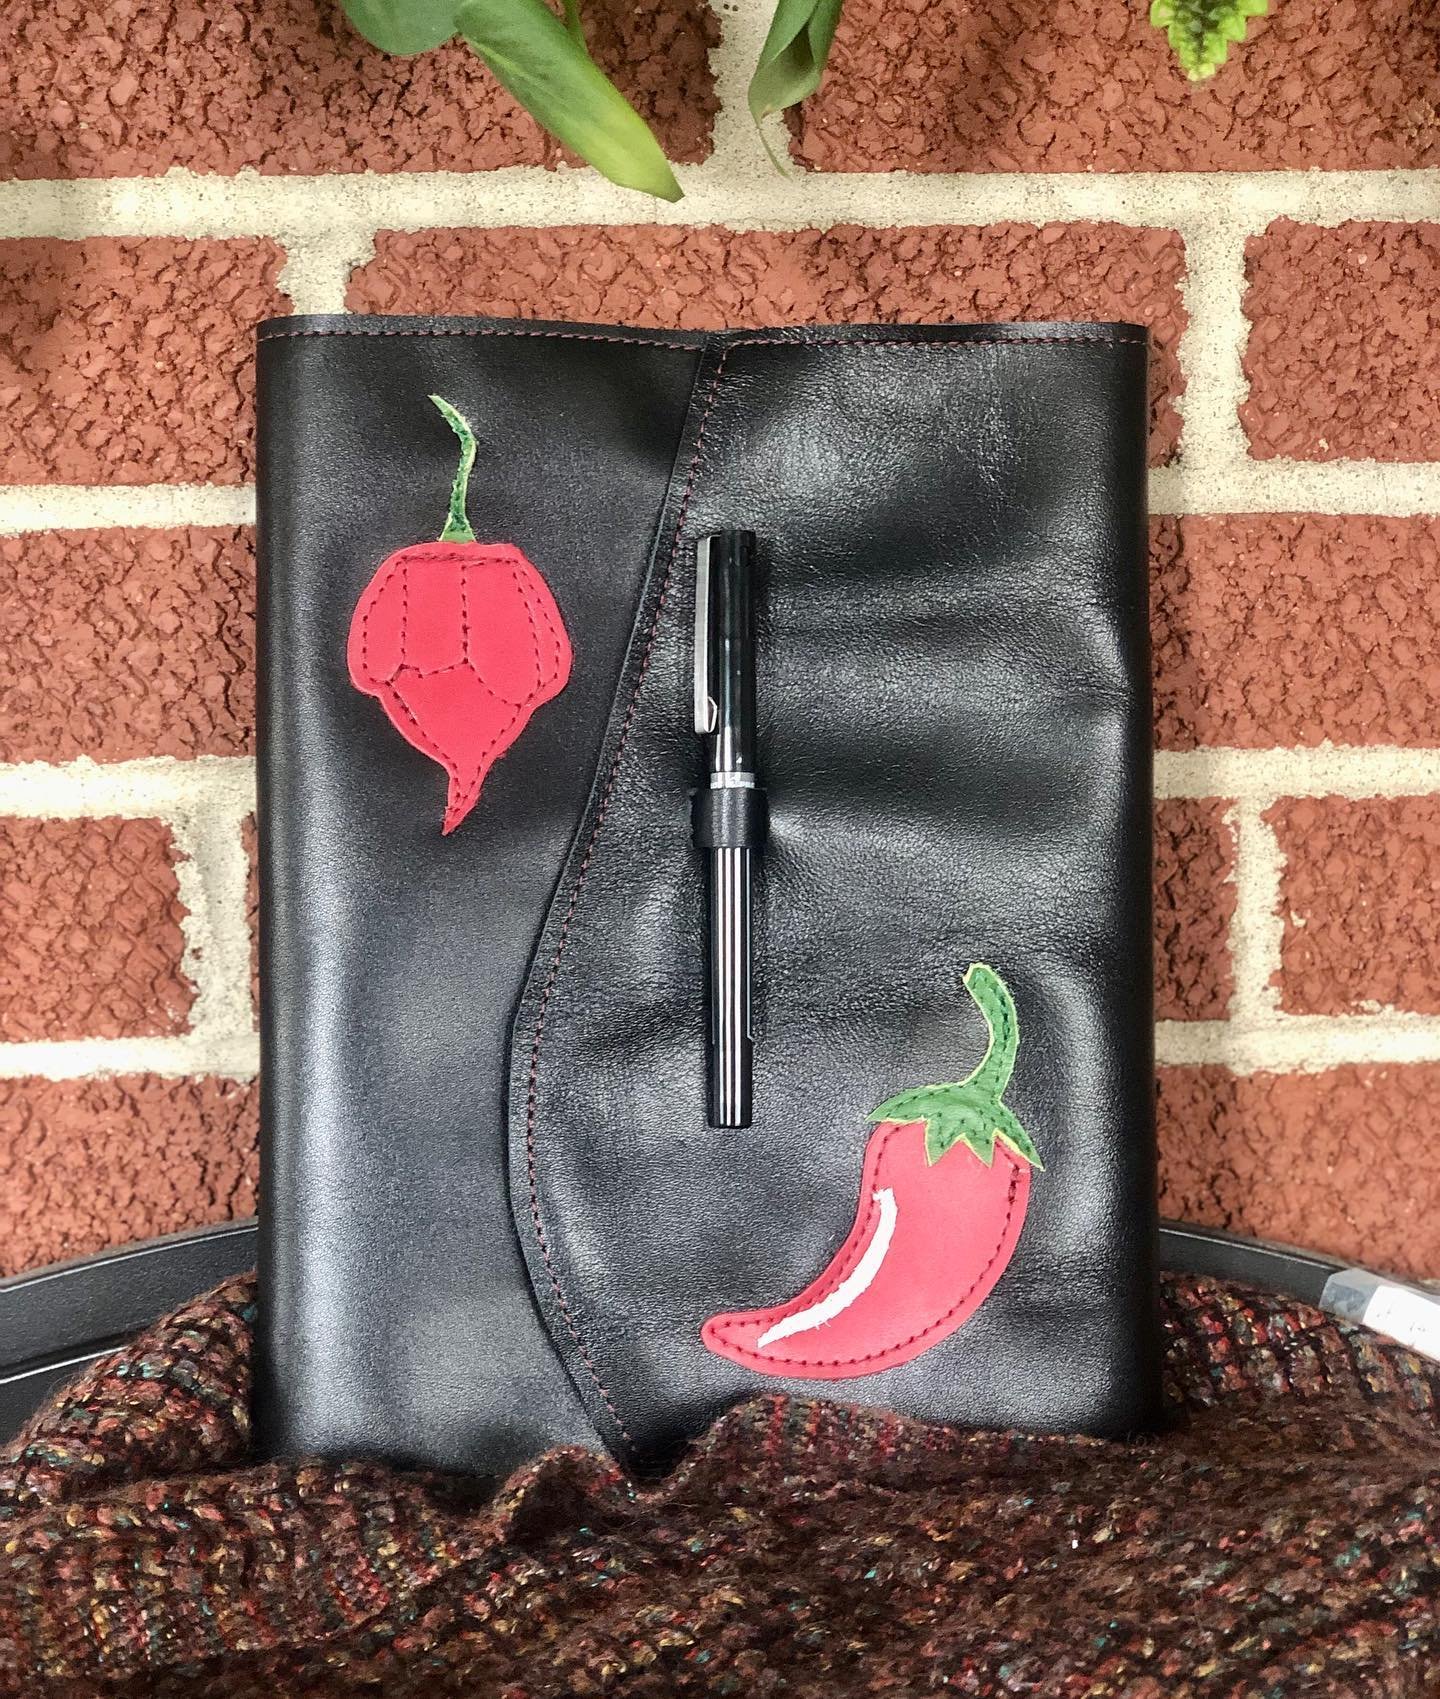 This was a custom order that a guy emailed me about earlier this year. He has several of my books and had been dreaming up something special for himself. One of his hobbies is growing exotic peppers, and he said that his garden is getting big enough 